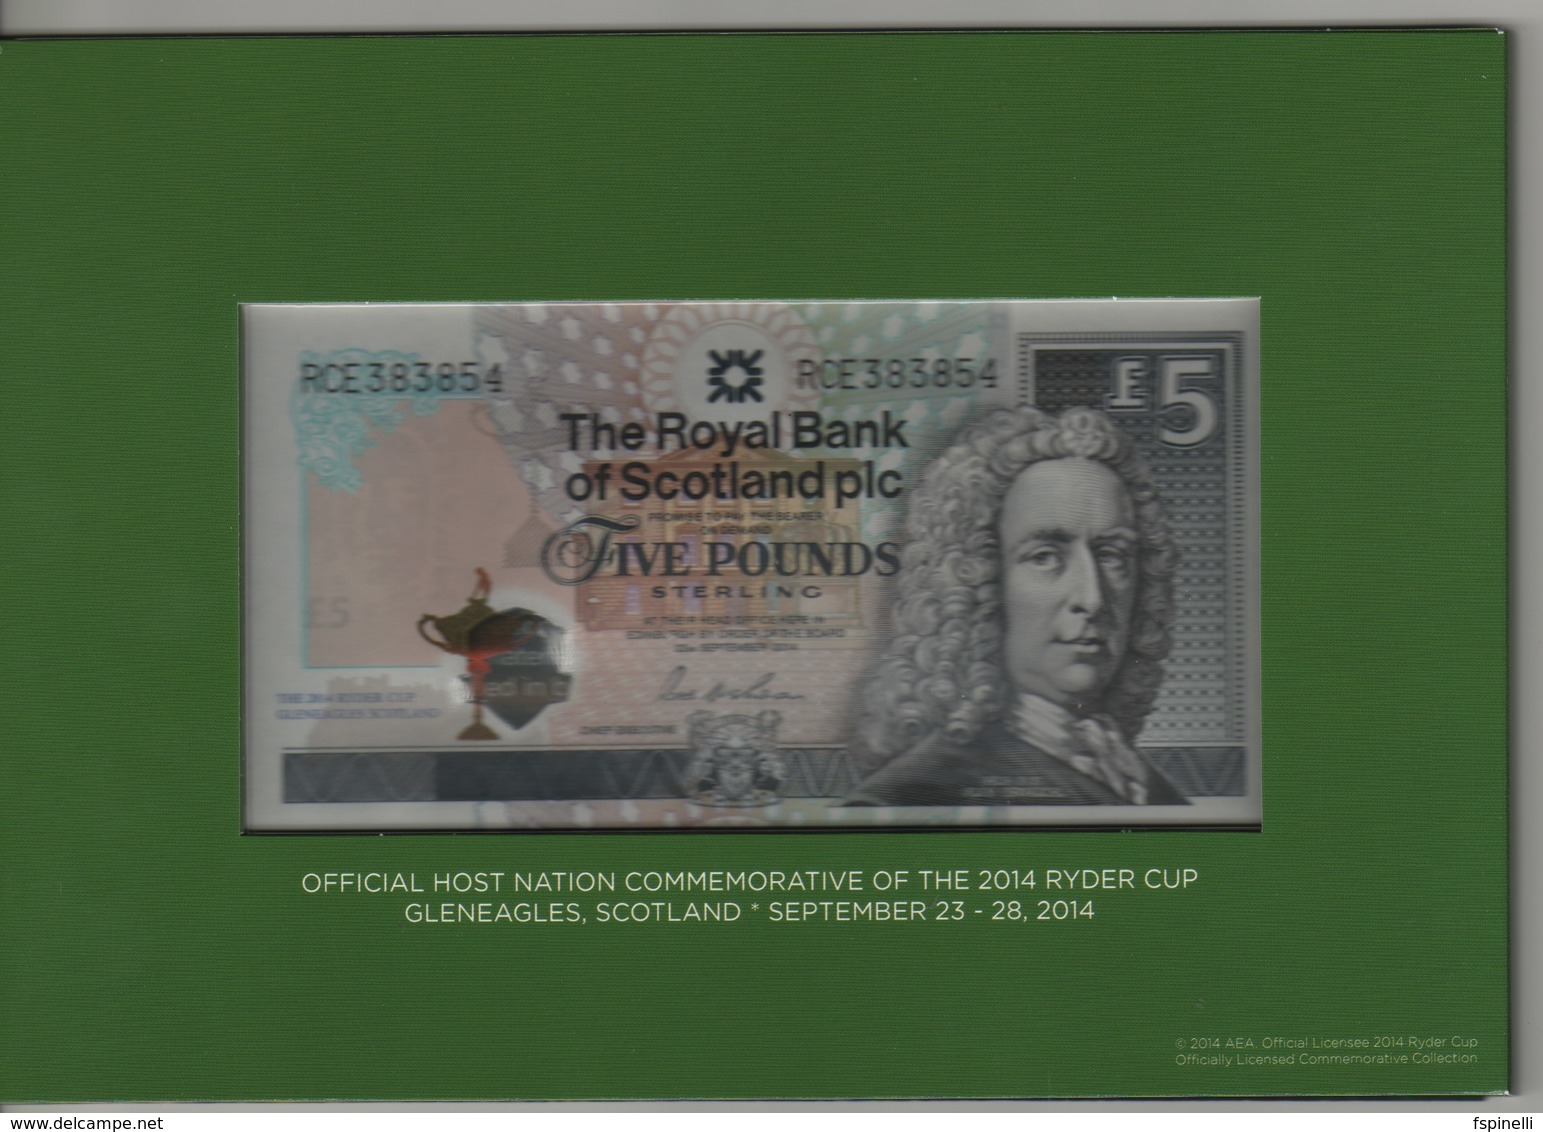 SCOTLAND   £5  "The Royal Bank Of Scotland"   P369 Commemorative  (GOLF  Ryder Cup Jubilee) 22.9.2014   UNC - 5 Pond